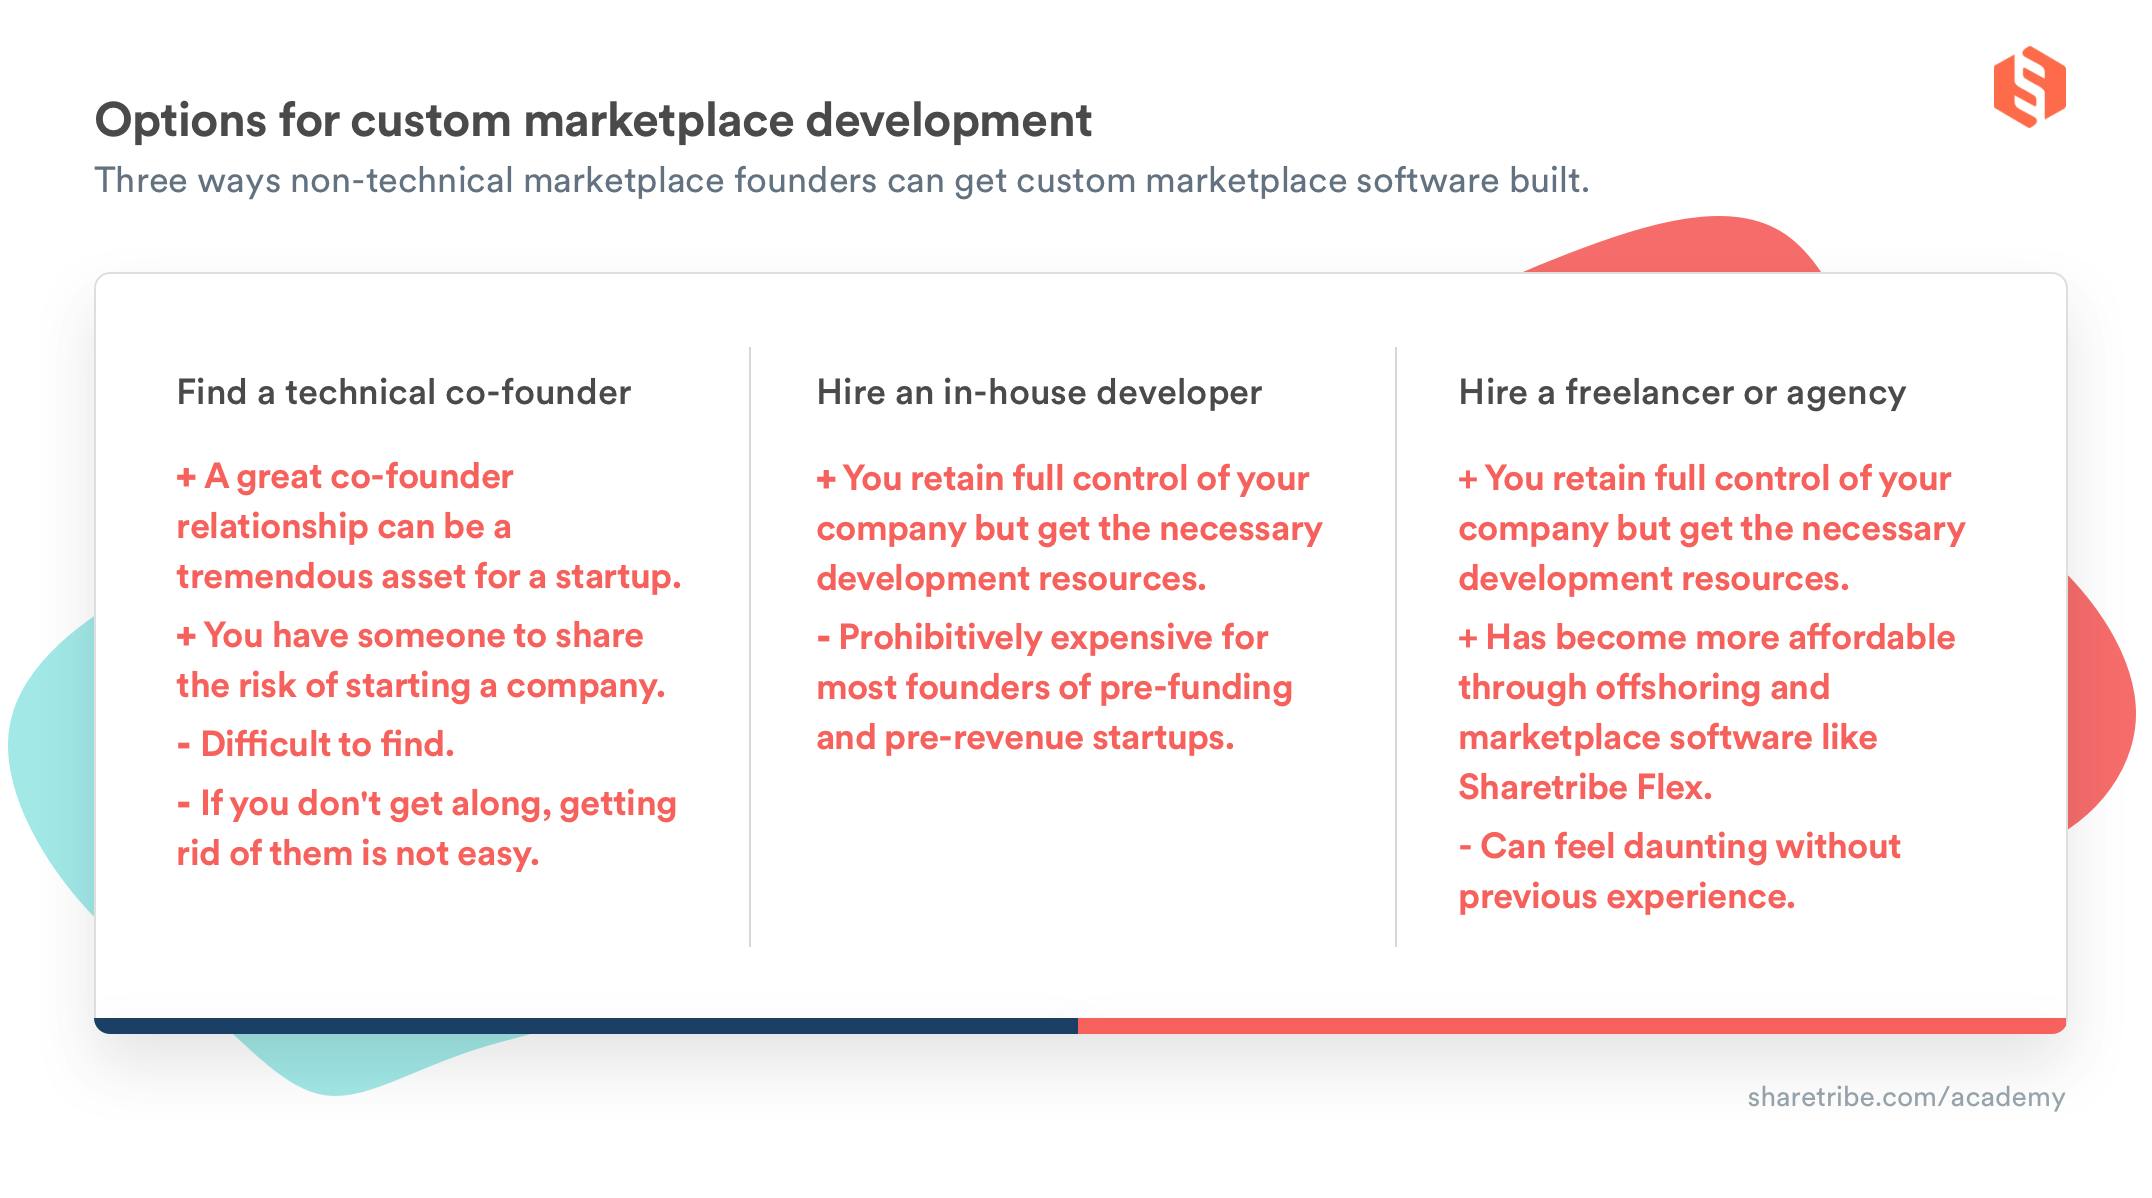 A table of the options for custom marketplace development with pros and cons listed. The table paraphrases what was told in the article above. One: Find a technical co-founder. Pros: A great co-founder relationship can be a tremendous asset for a startup. You have someone to share the risk of starting a company. Cons: Difficult to find. If you don't get along, getting rid of them is not easy. Two: Hire an in-house developer. Pros: You retain full control of your company but get the necessary development resources. Cons: Prohibitively expensive for most founders of pre-funding and pre-revenue startups. Three: Hire a freelancer or agency. Pros: You retain full control of your company but get the necessary development resources. Has become more affordable through offshoring and marketplace software like Sharetribe. Cons: Can feel daunting without previous experience.